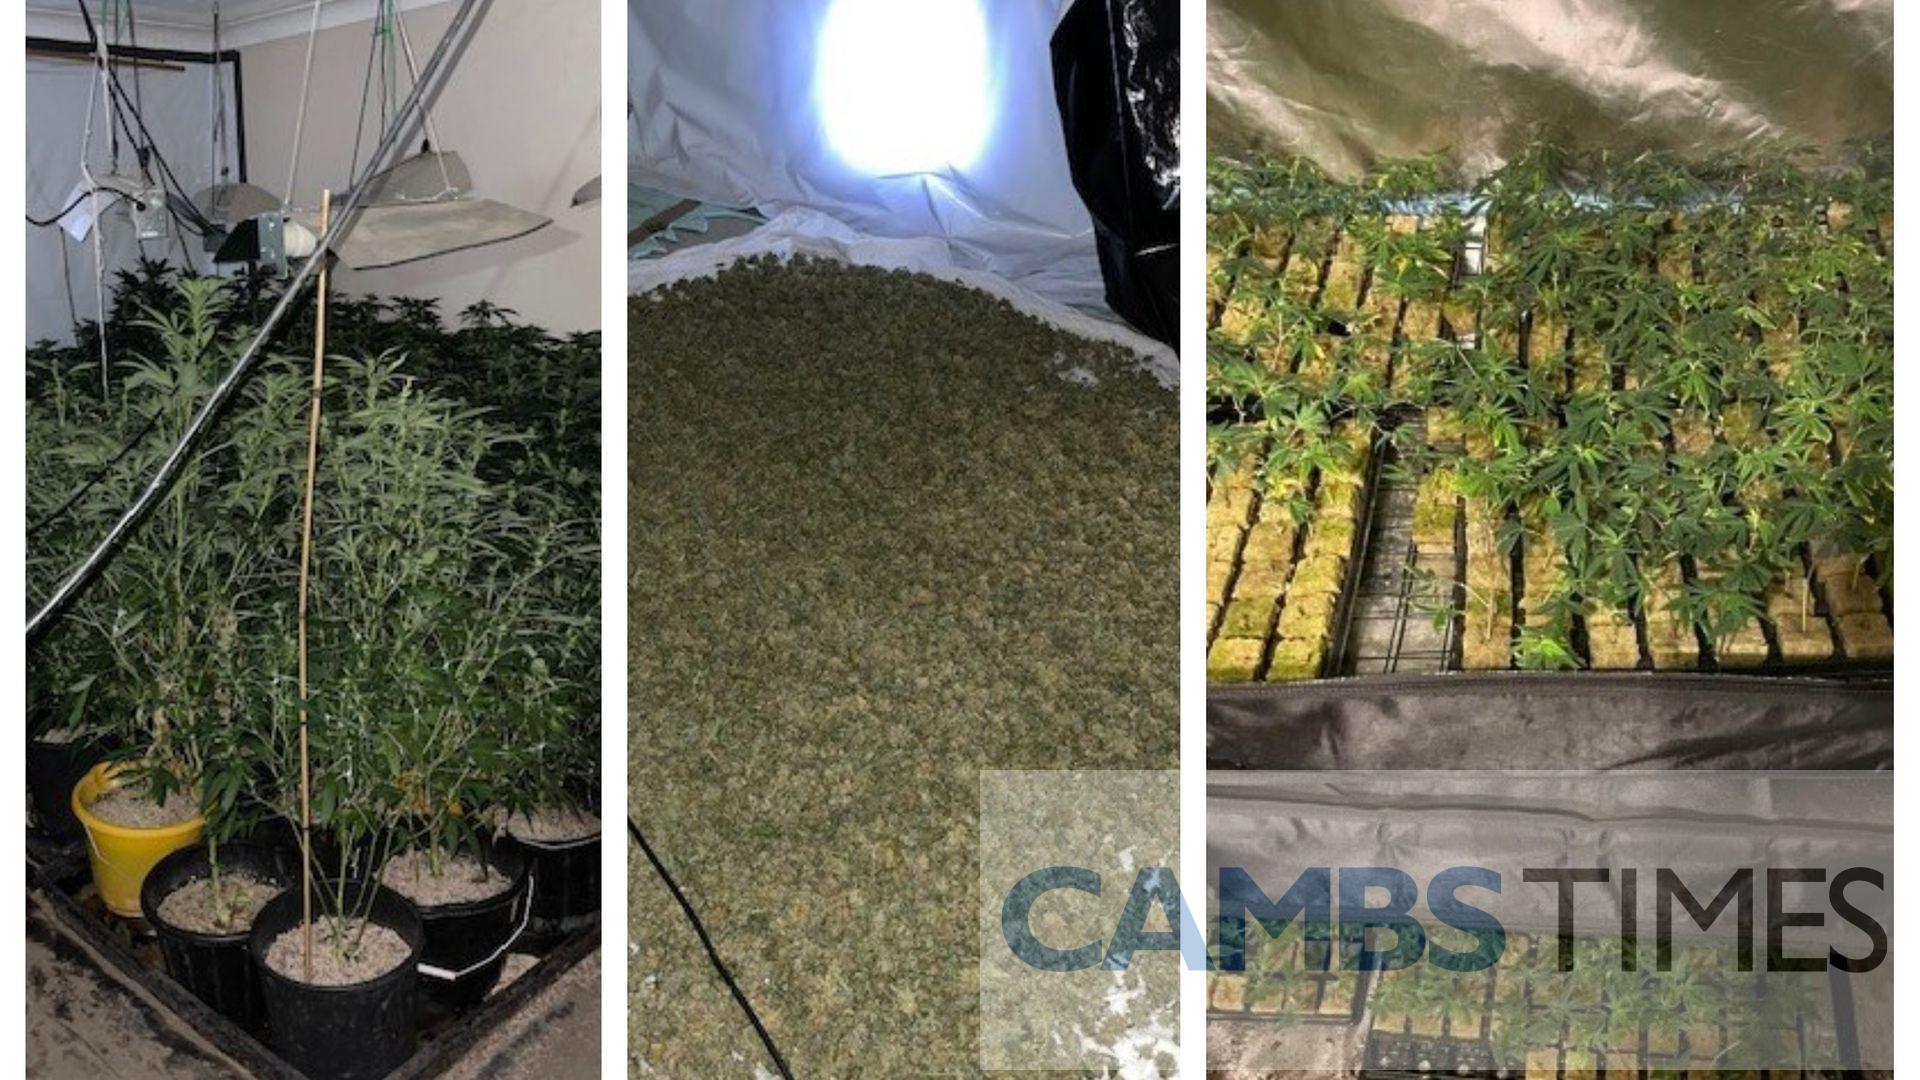 Cannabis worth over £656000 uncovered in Fen village – Cambs Times